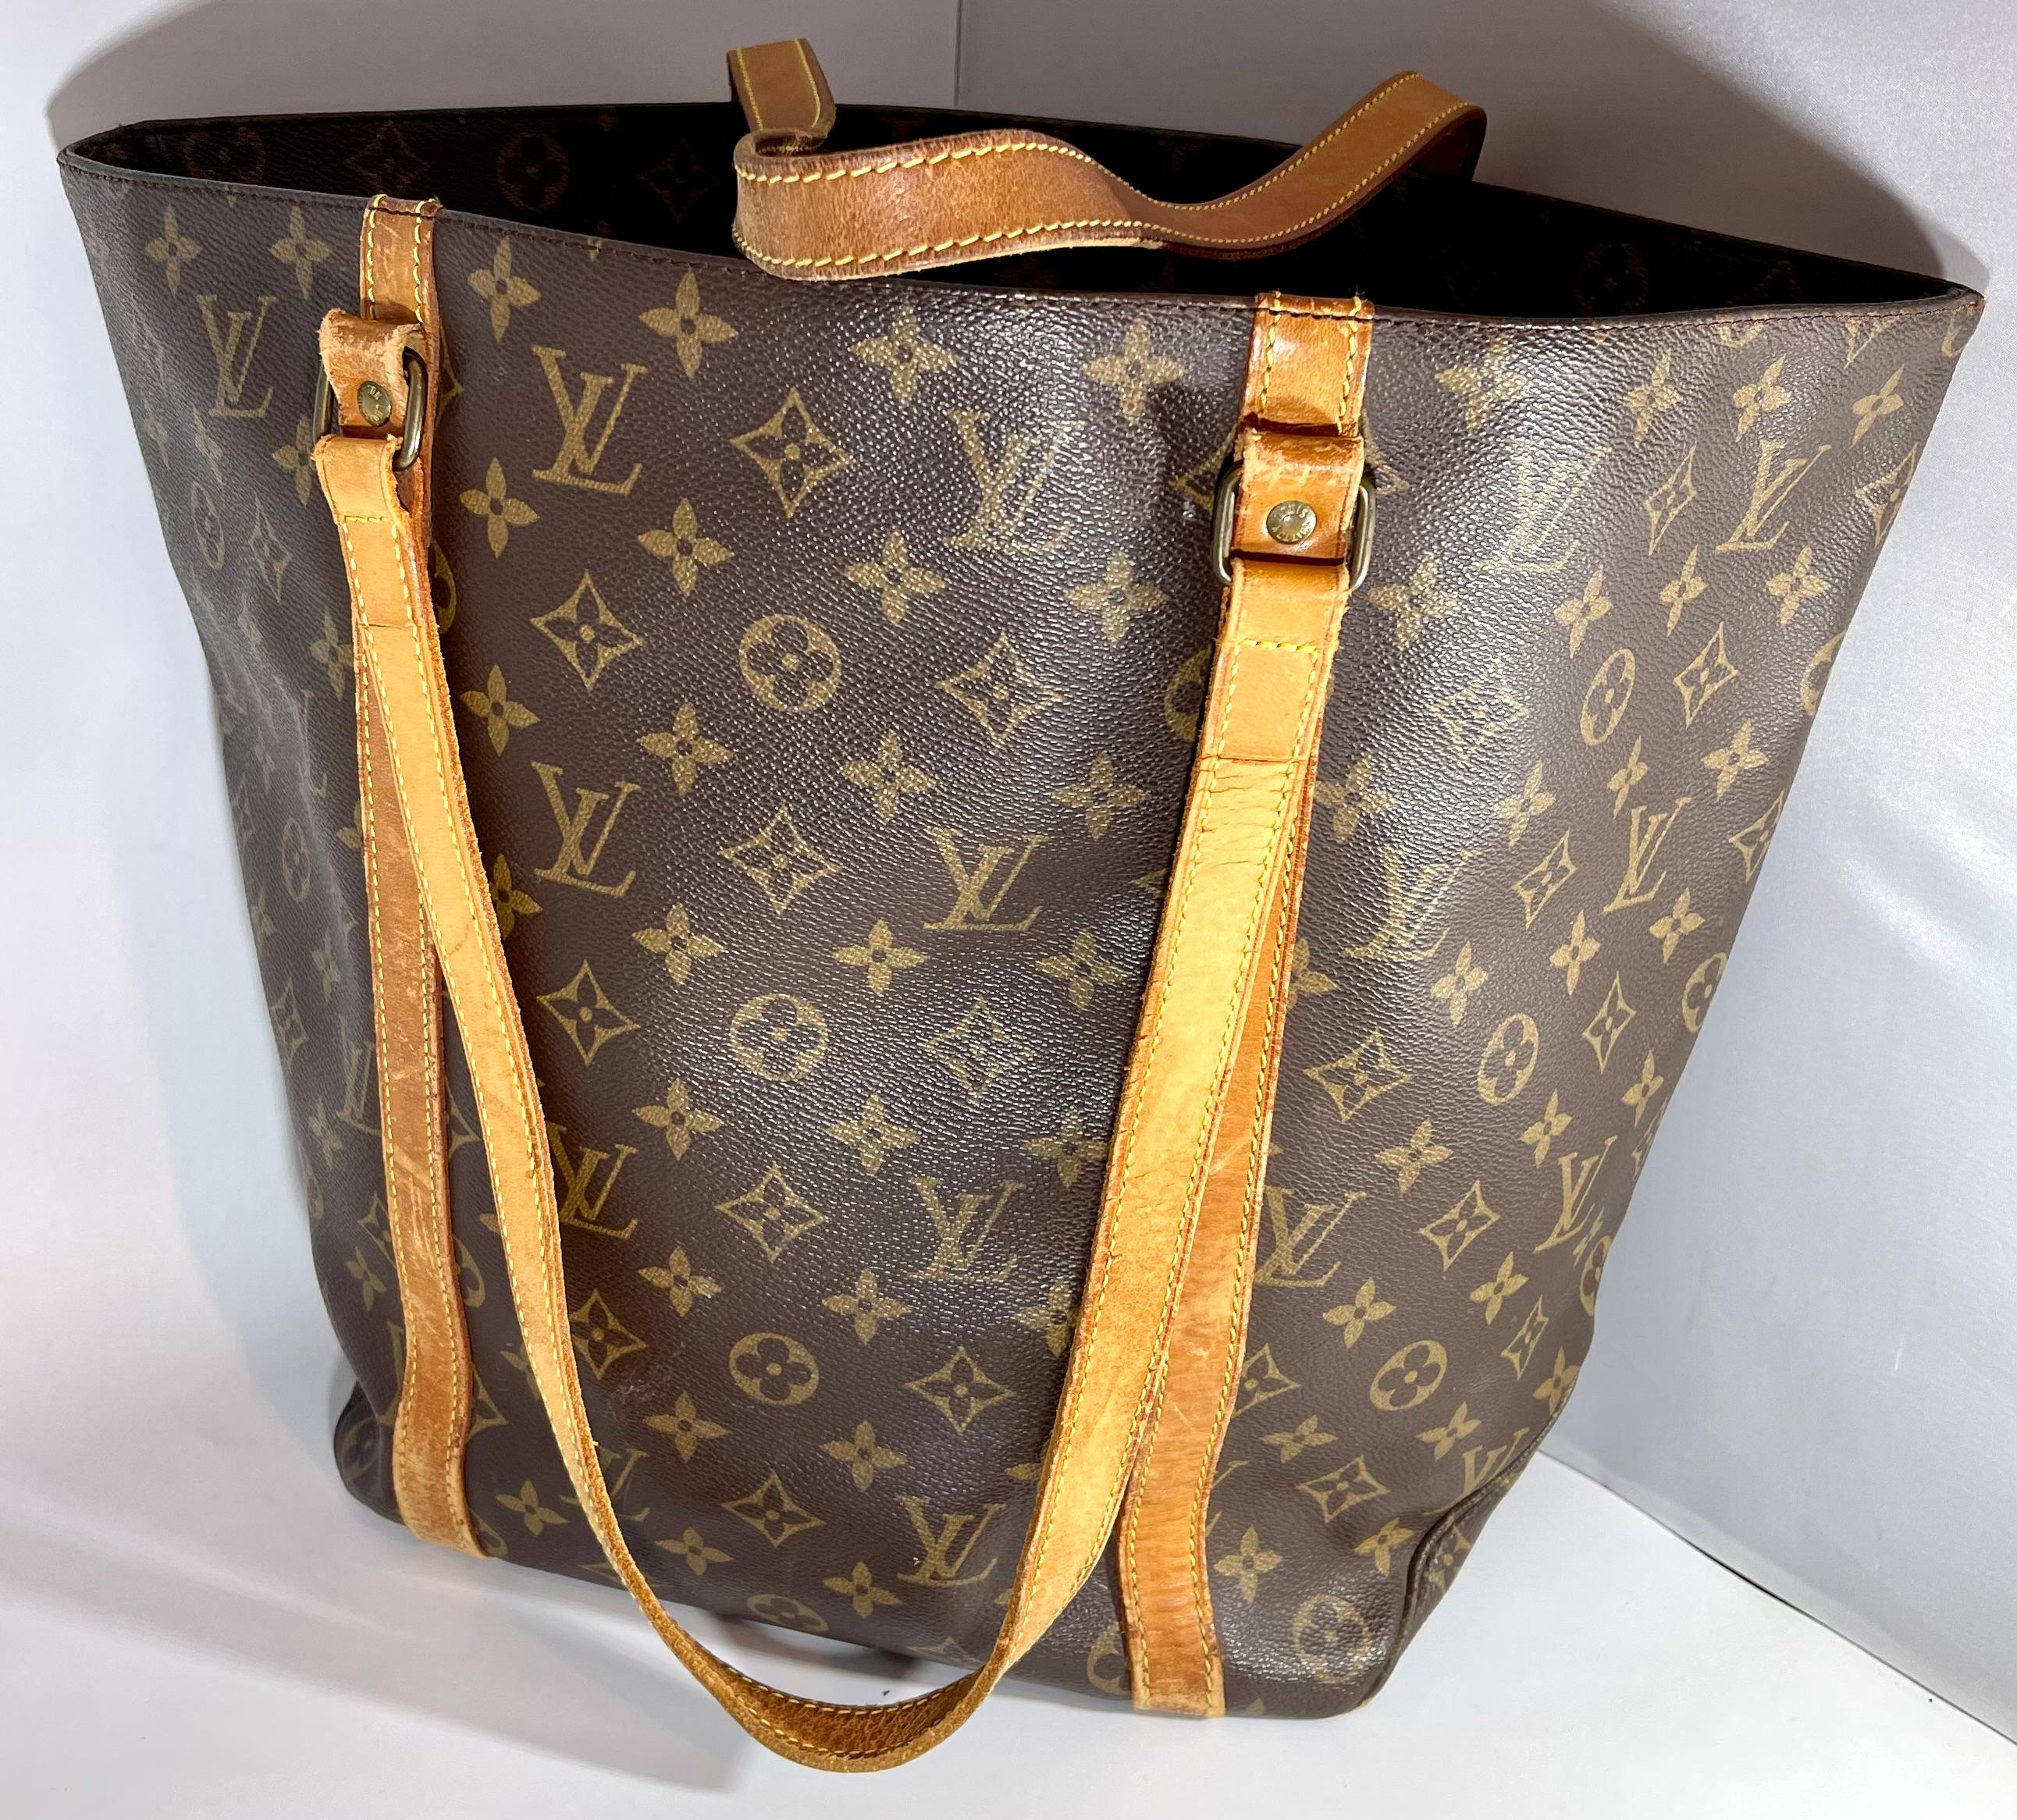 Louis Vuitton Shoulder Bag Sac Shopping in Brown Monogram Canvas and Golden Brass hardware.
This is a large vintage shopping tote and is simple and designed for ease. It is crafted of classic Louis Vuitton monogram on coated canvas with